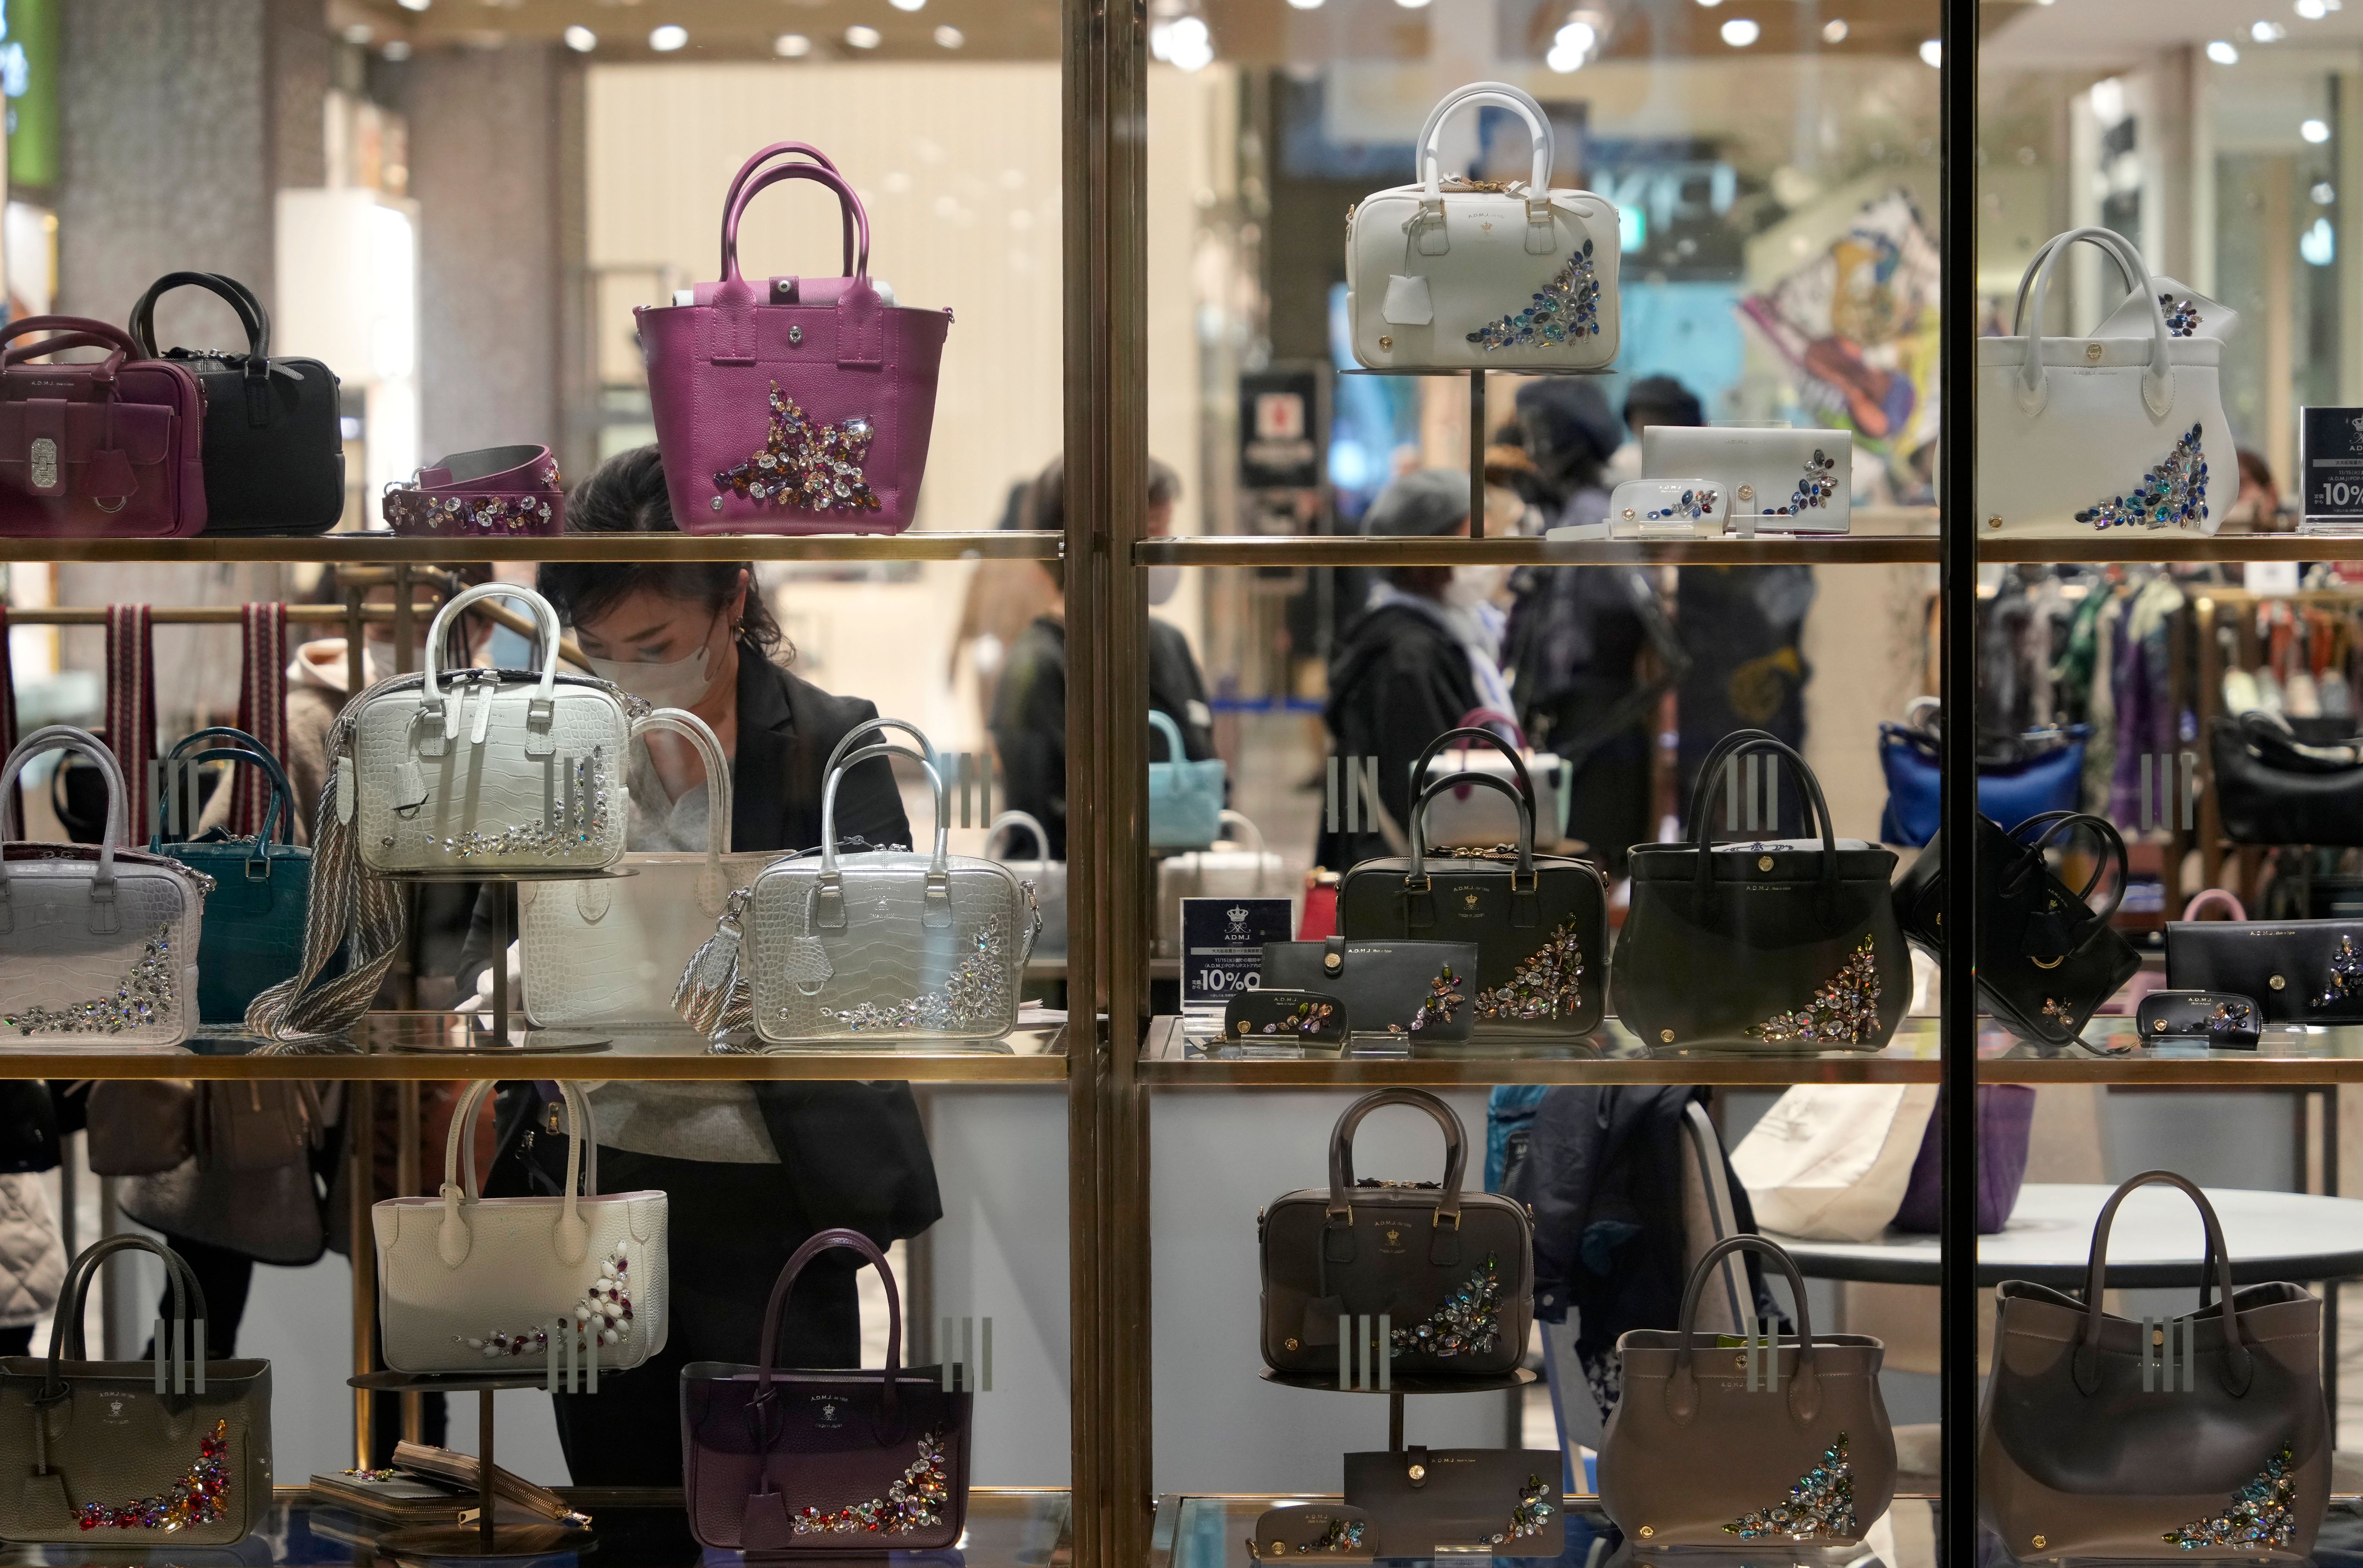 Luxury handbags in a display area at the Vestiaire Collective SA News  Photo - Getty Images